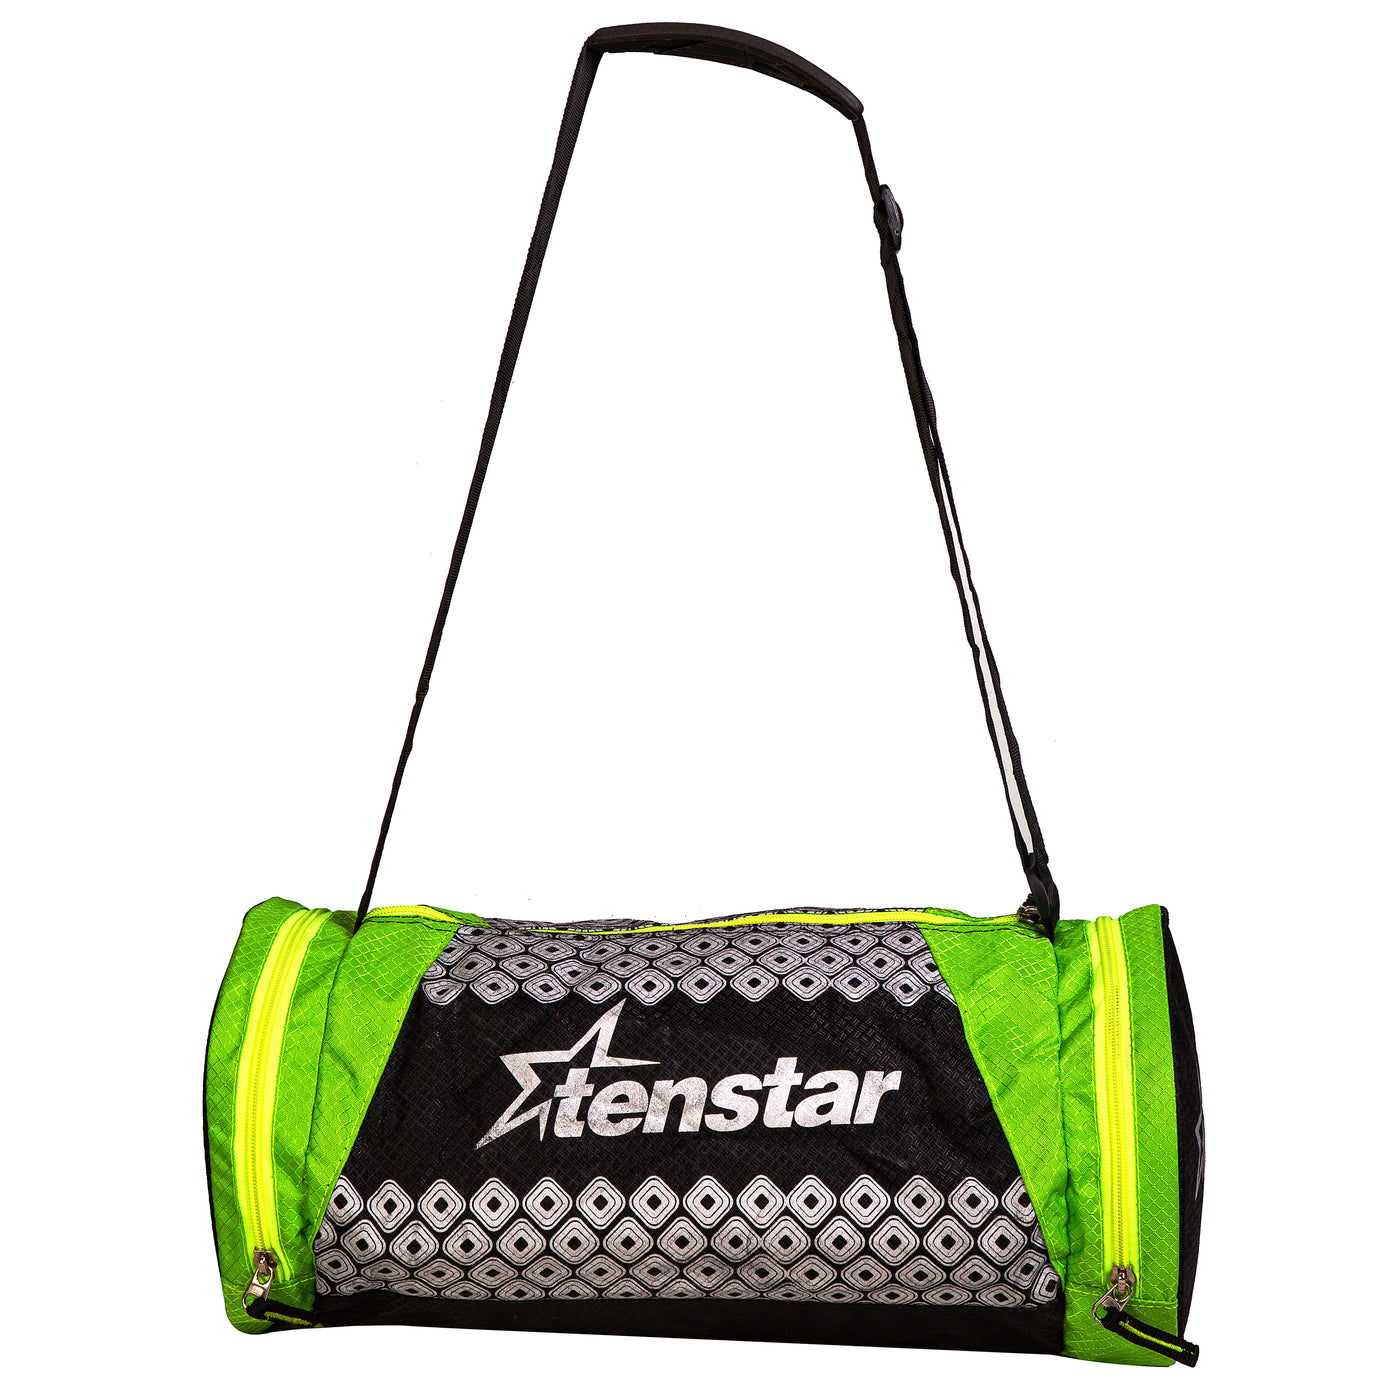 tenstar gym fitness exercise sports bag green 